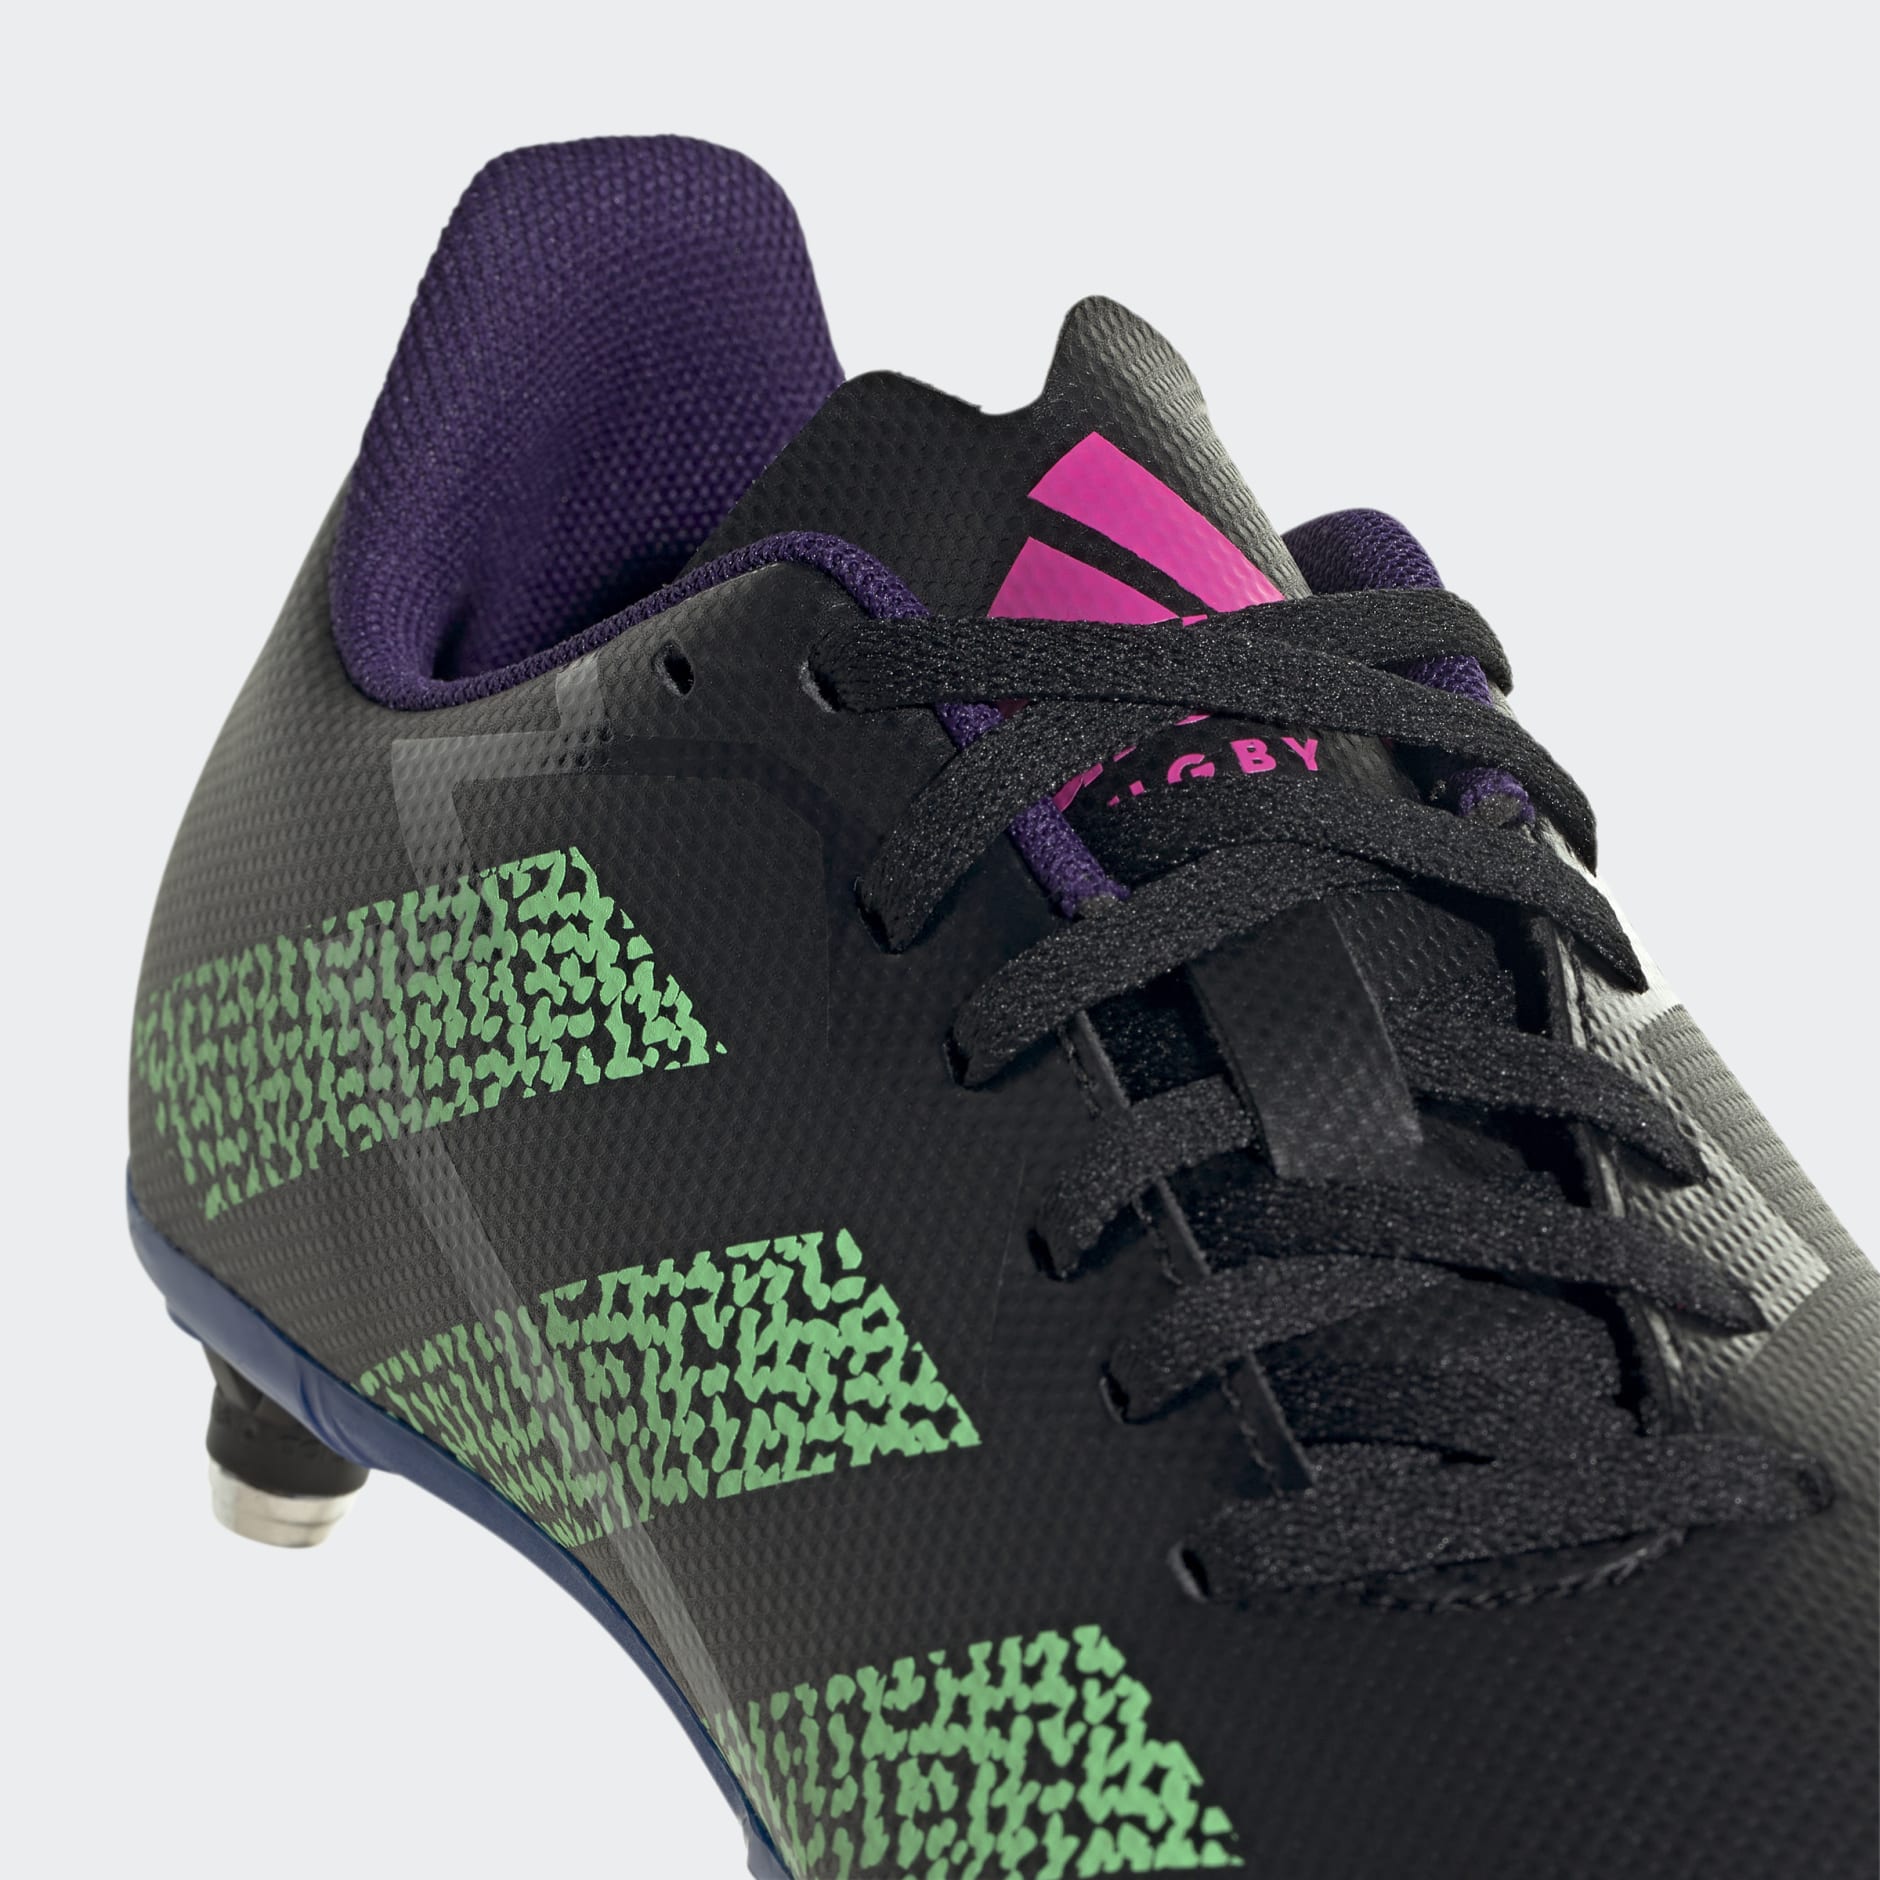 Shoes - Rugby Junior SG Boots - Black | adidas South Africa